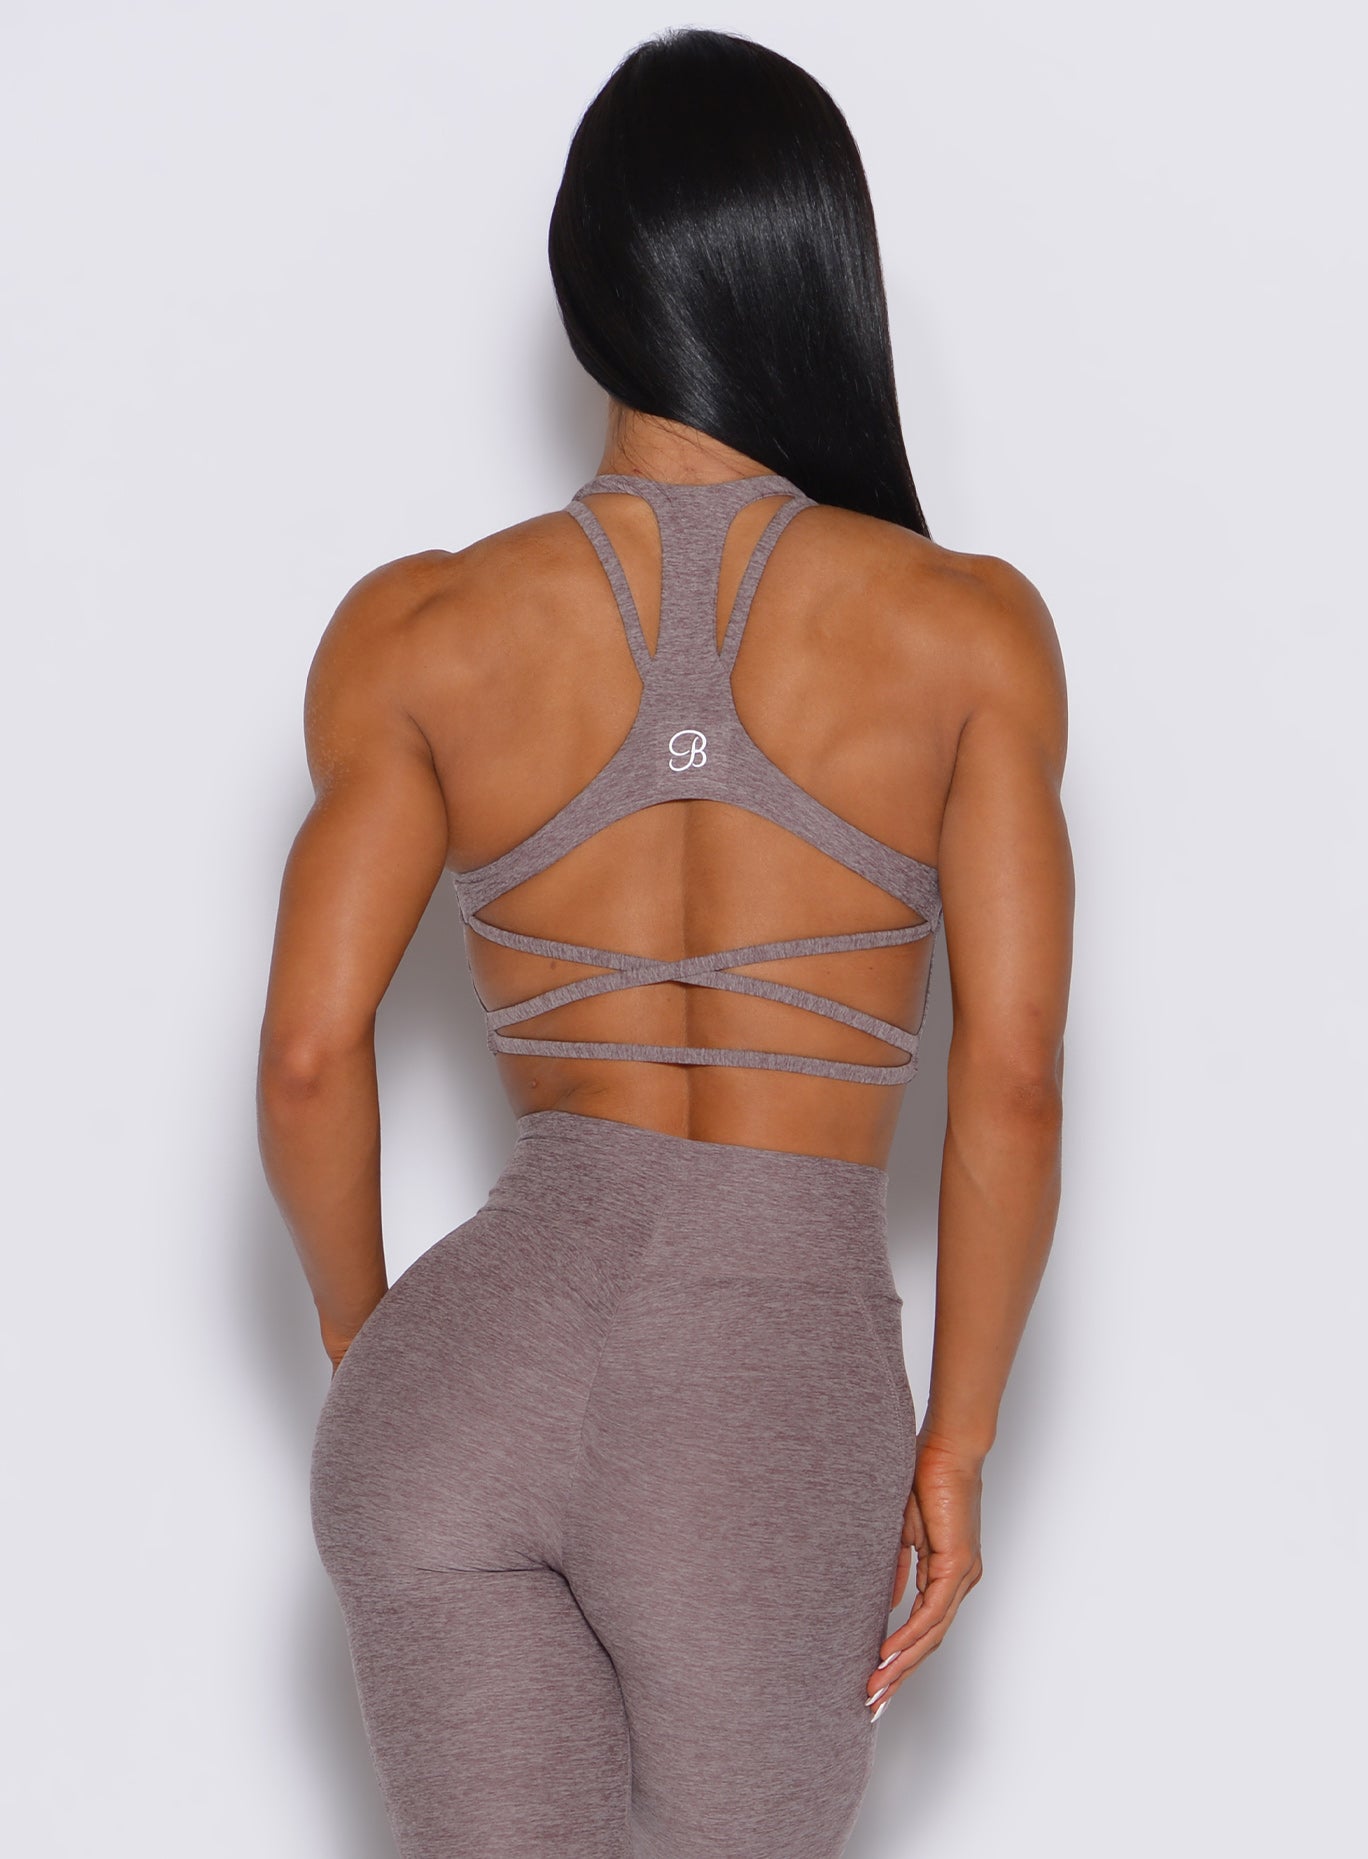 back profile view of a model wearing our viral tank bra in london fog color along with the matching leggings